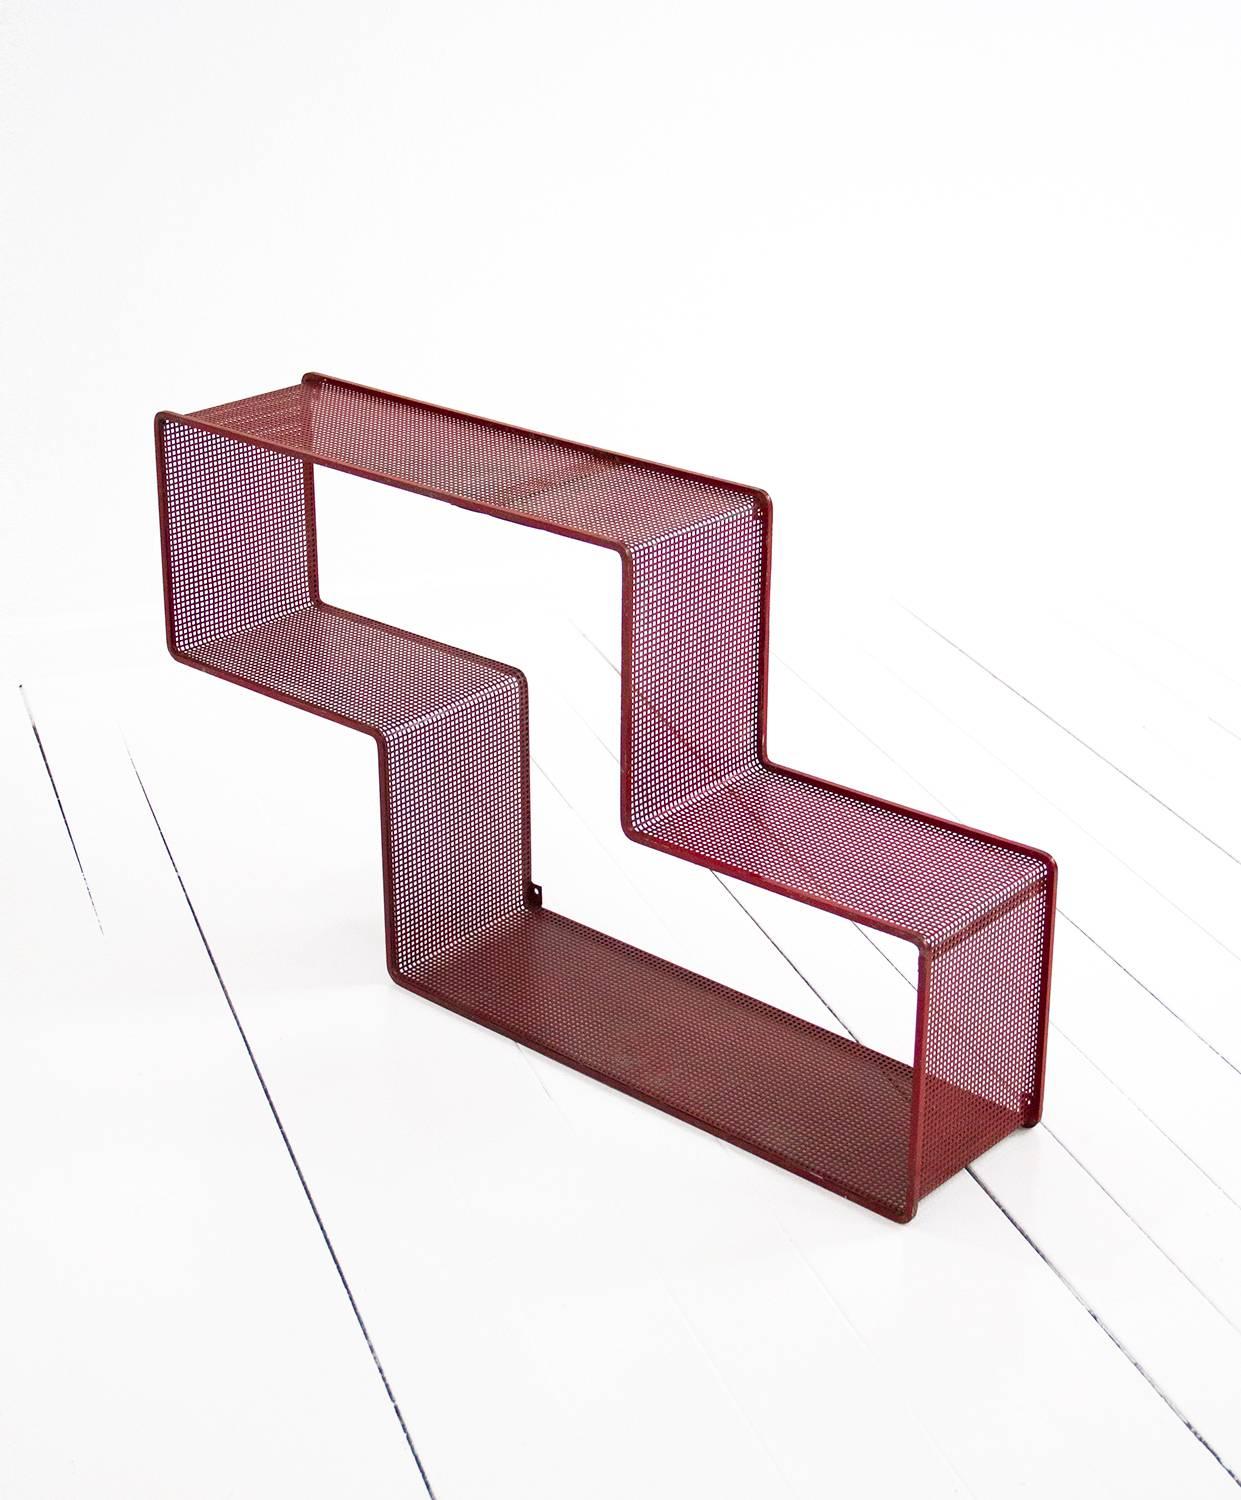 Red Dedal Wall Shelf by Mathieu Matégot, Perforated Steel, circa 1950, France For Sale 2